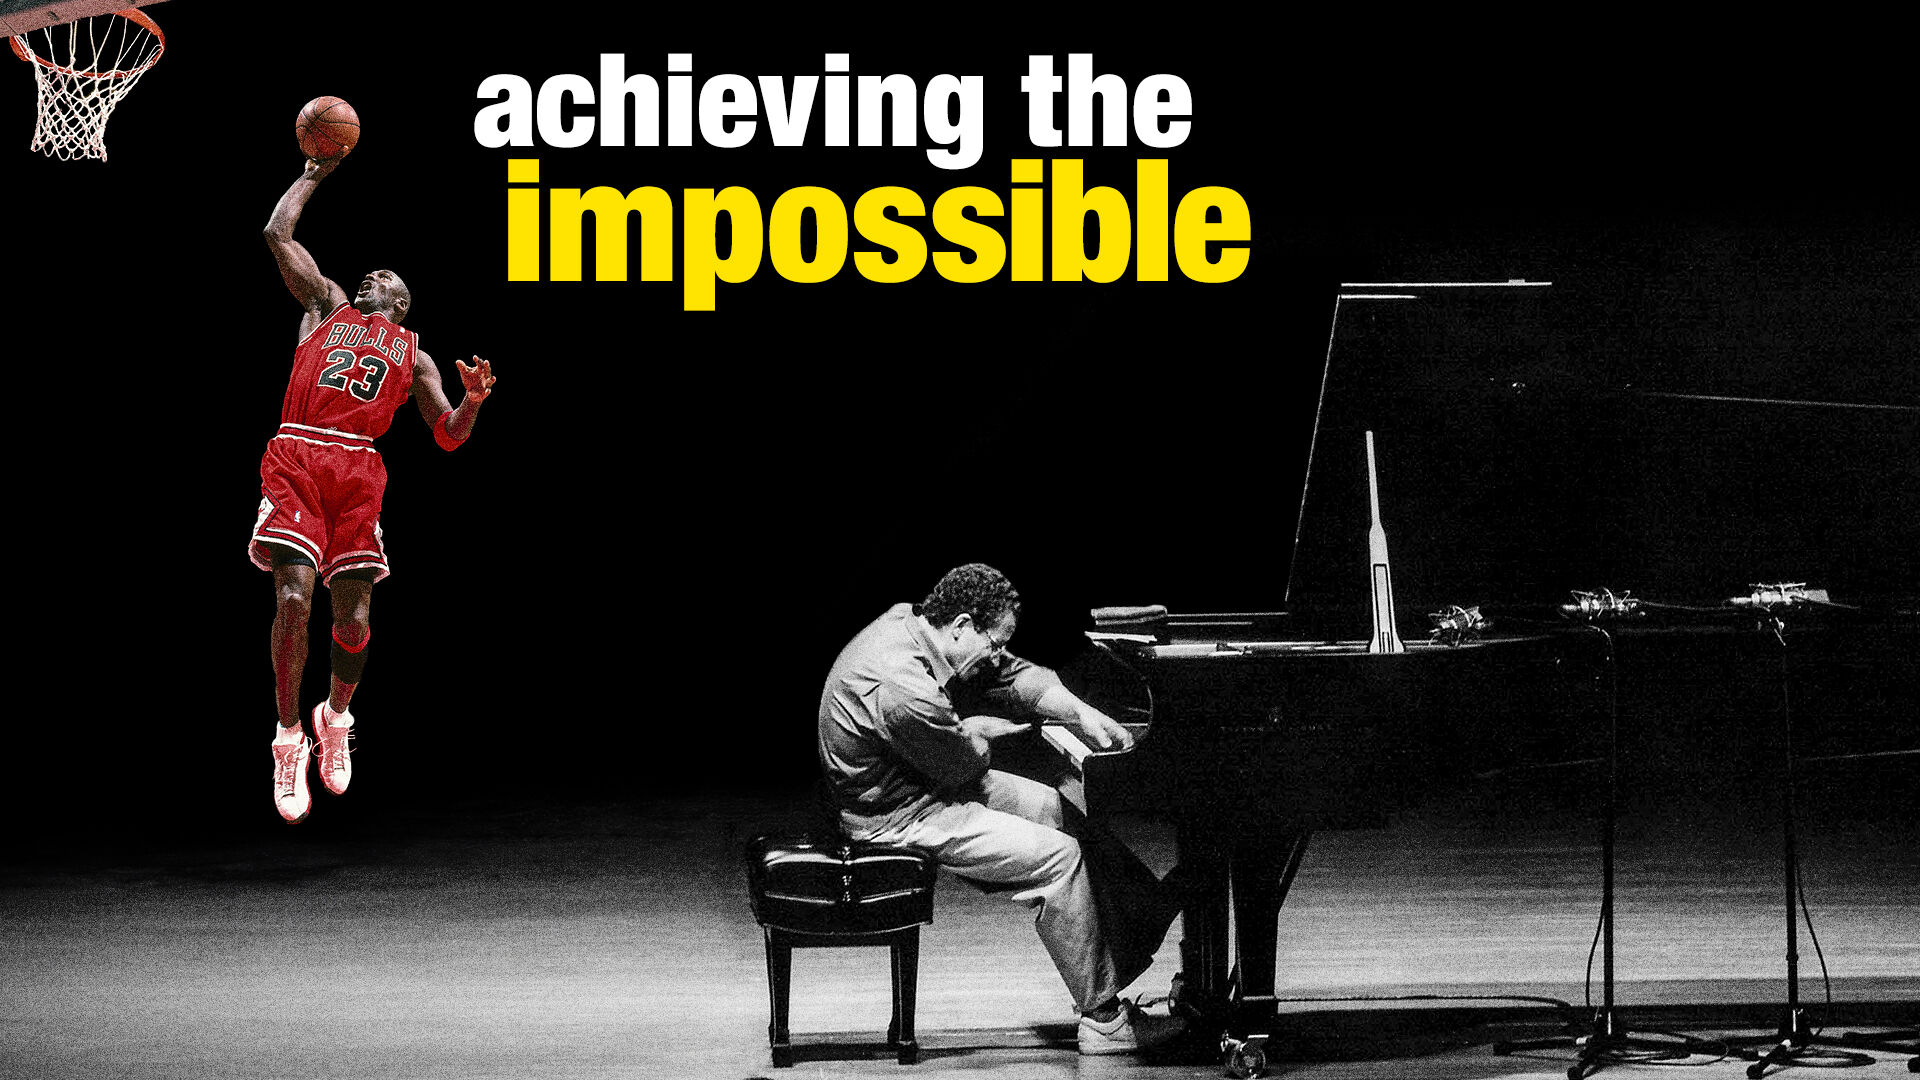 How Keith Jarrett (and others) achieve the impossible